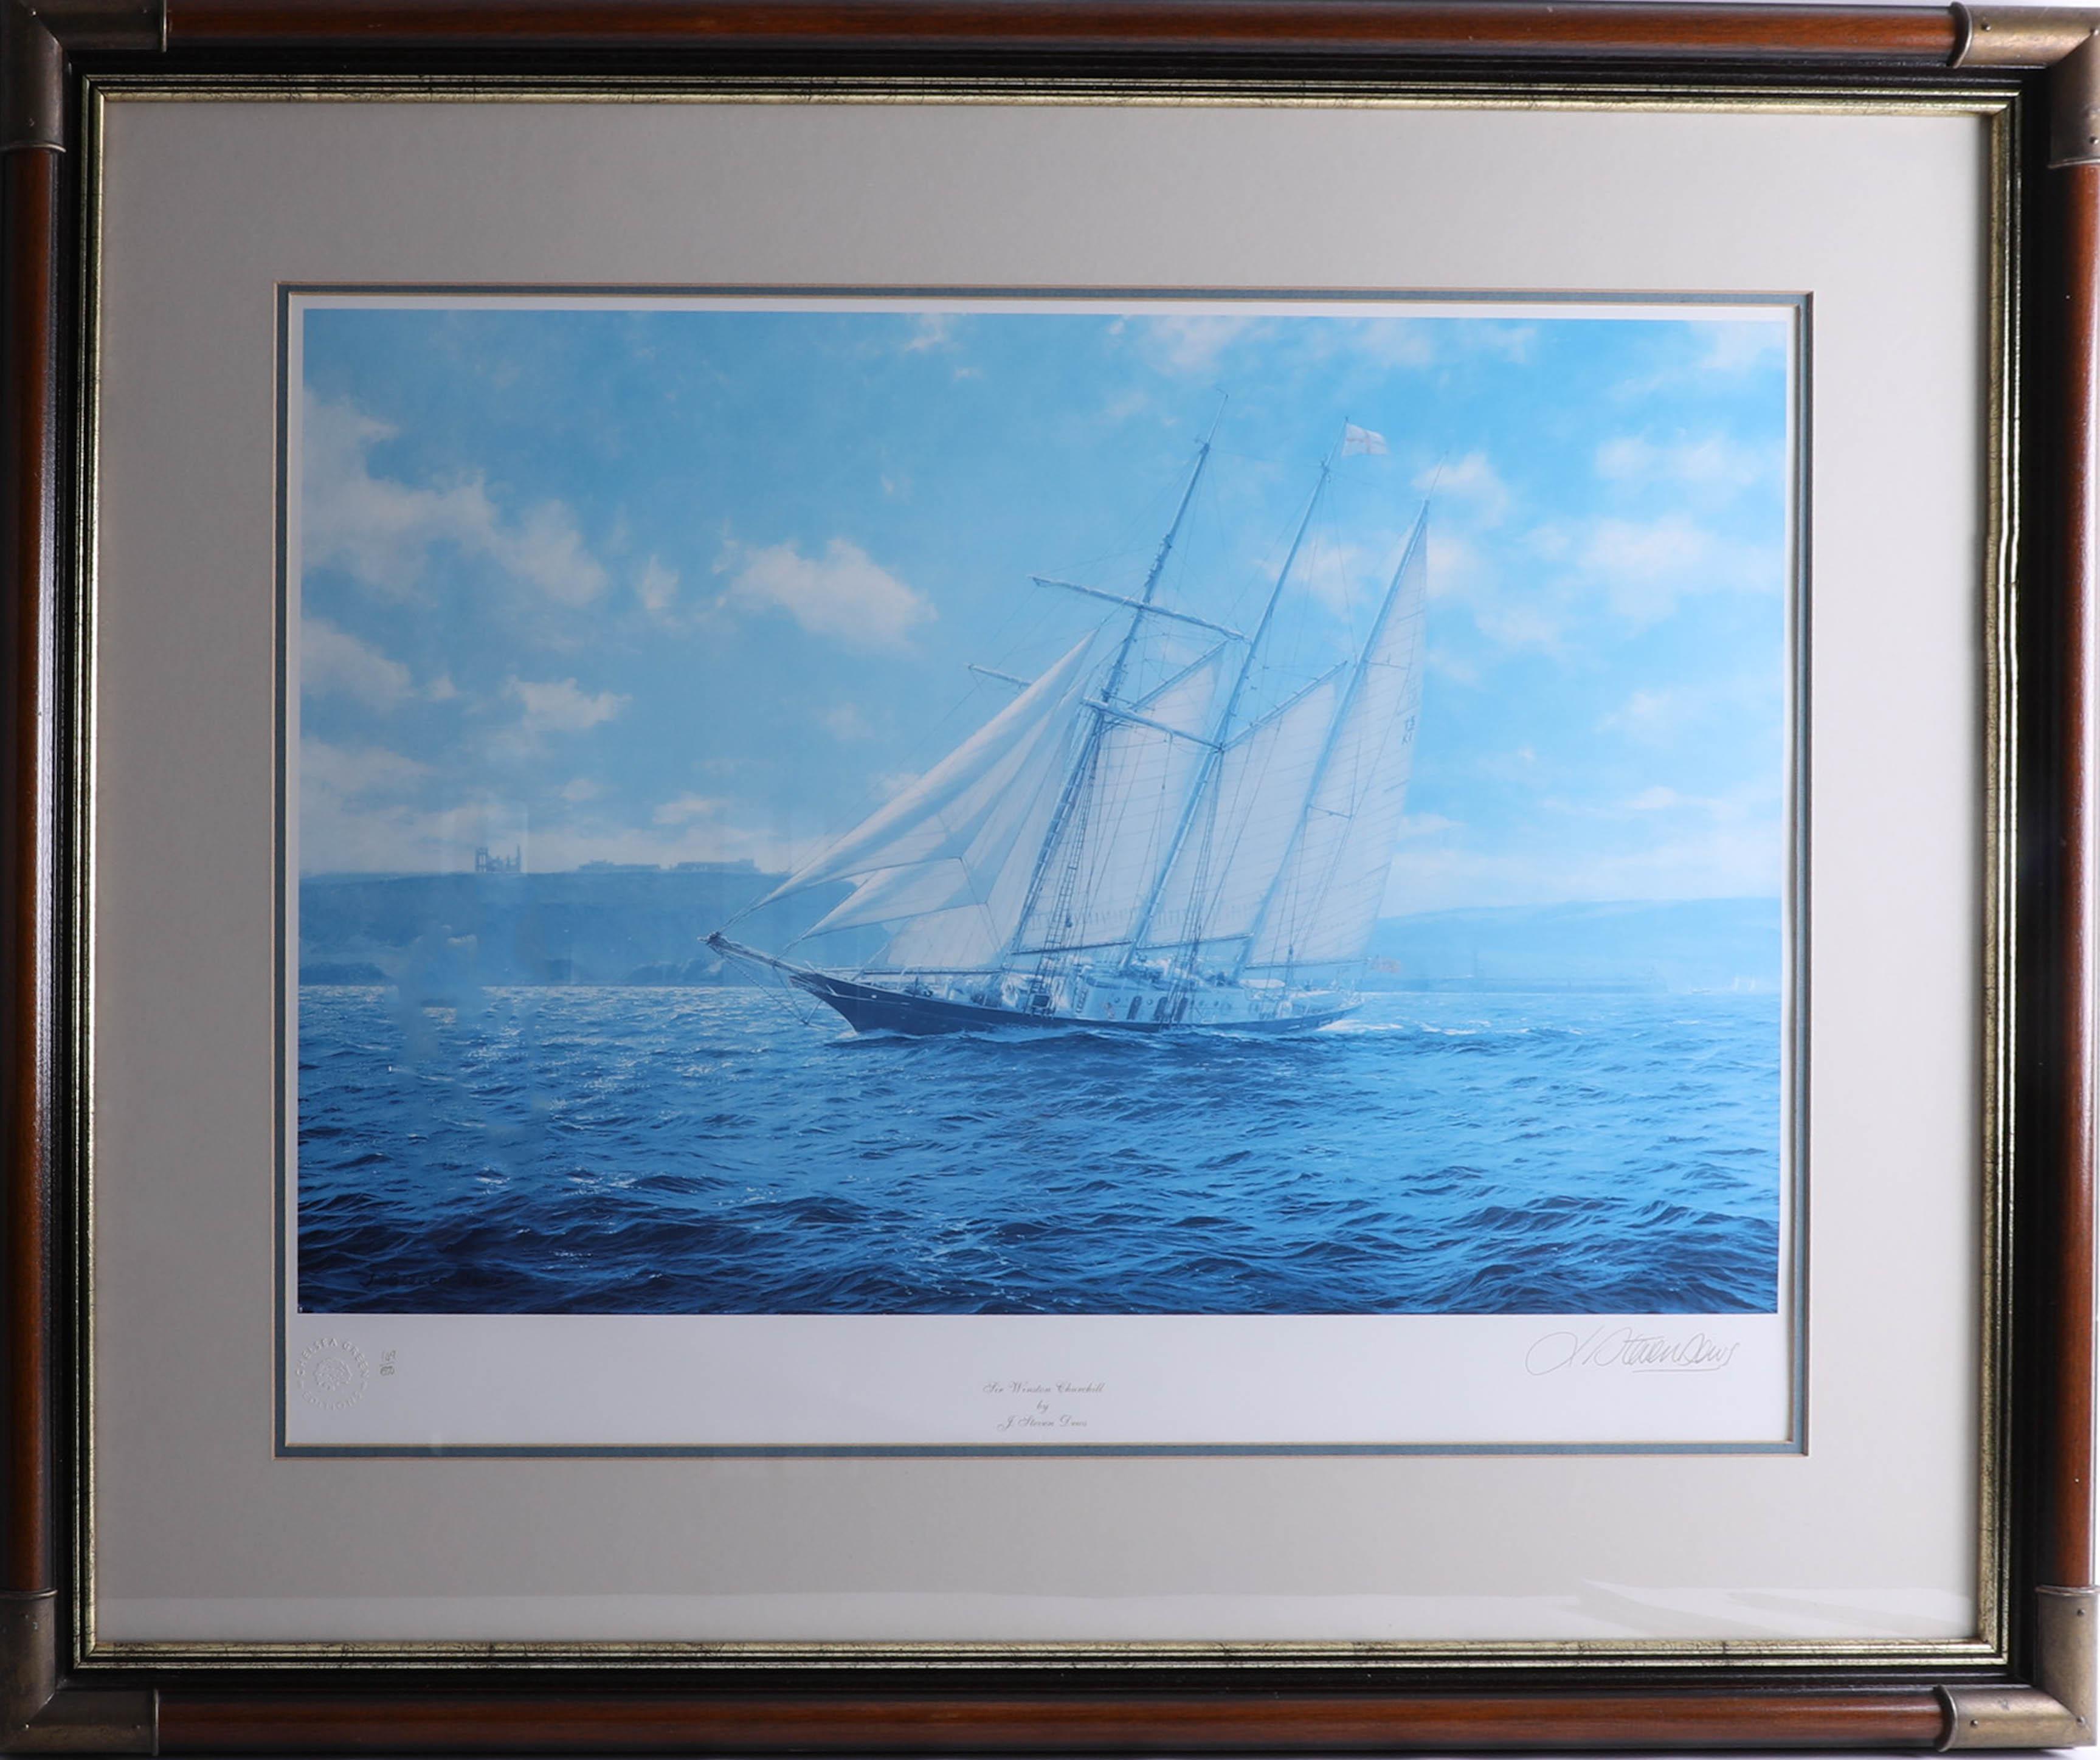 A collection of J.Steven Dews prints including 'Shamrock V racing off Yarmouth', 'The Whaler Phoenix - Image 4 of 5